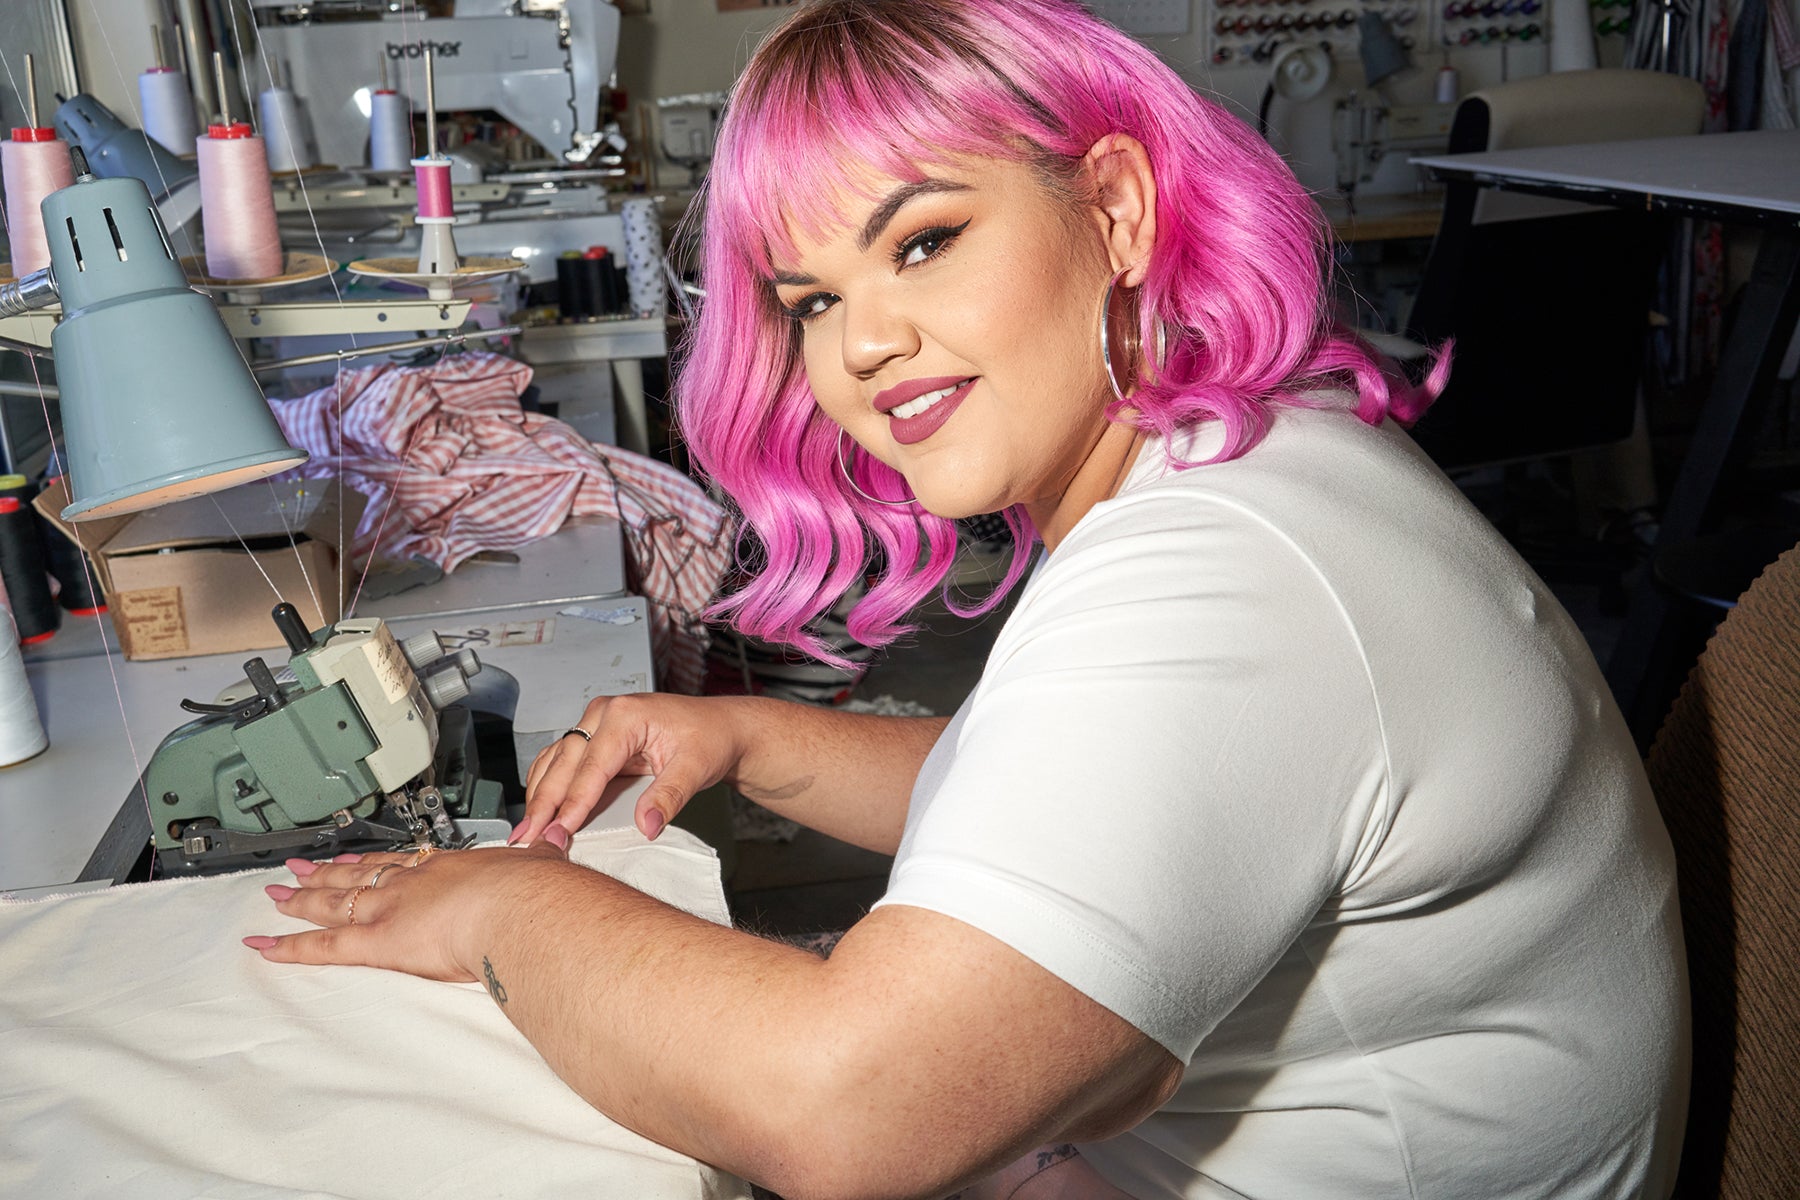 Plus fashion designer Ashley Nell Tipton with vibrant pink hair, smiling and sewing fabric.